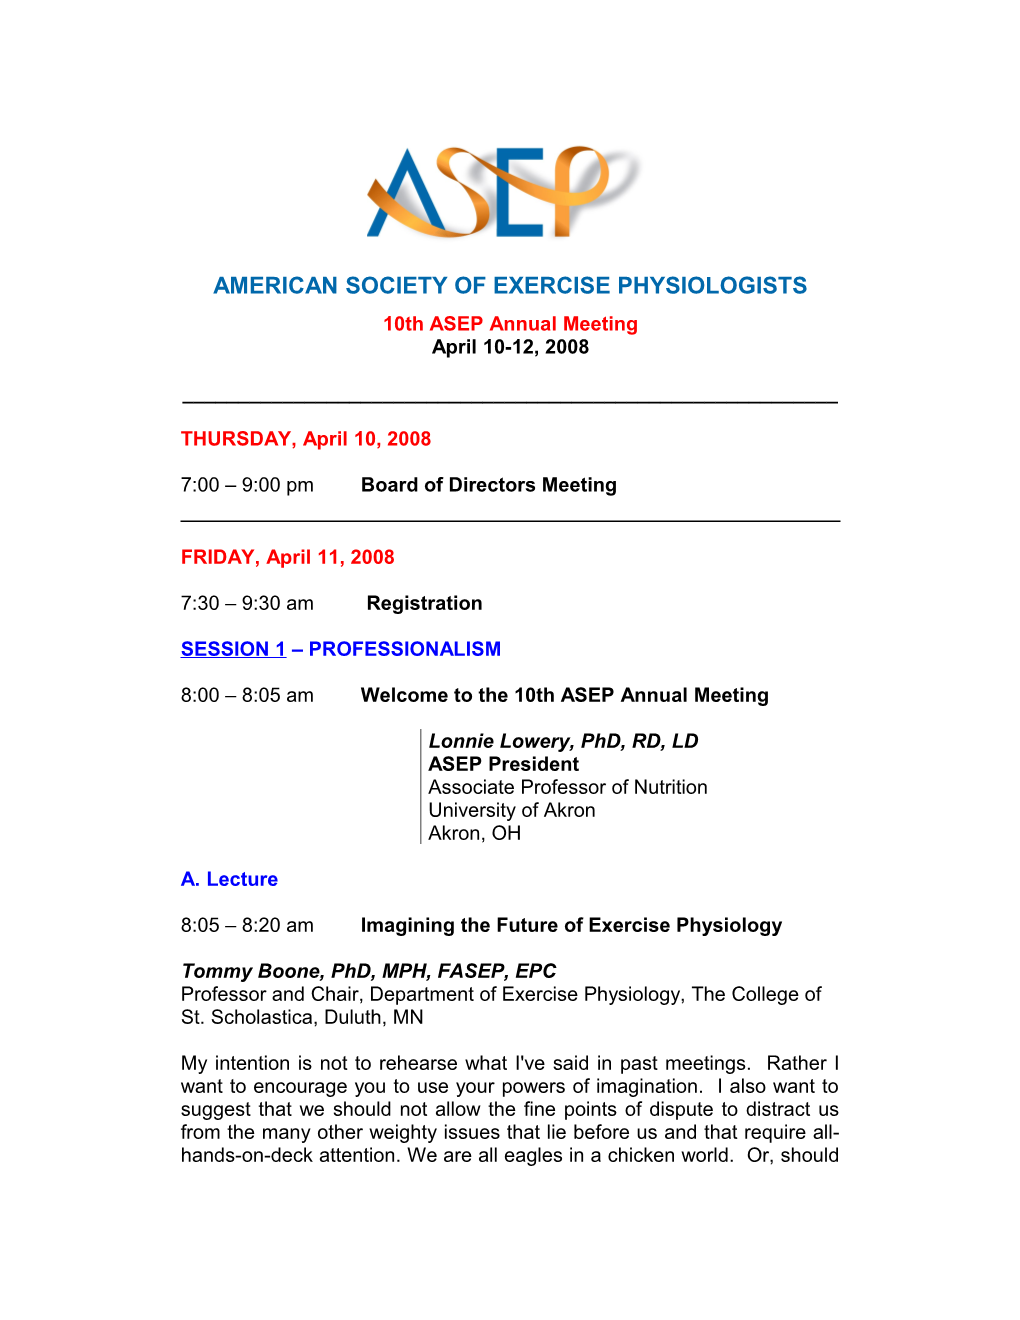 American Society of Exercise Physiologists